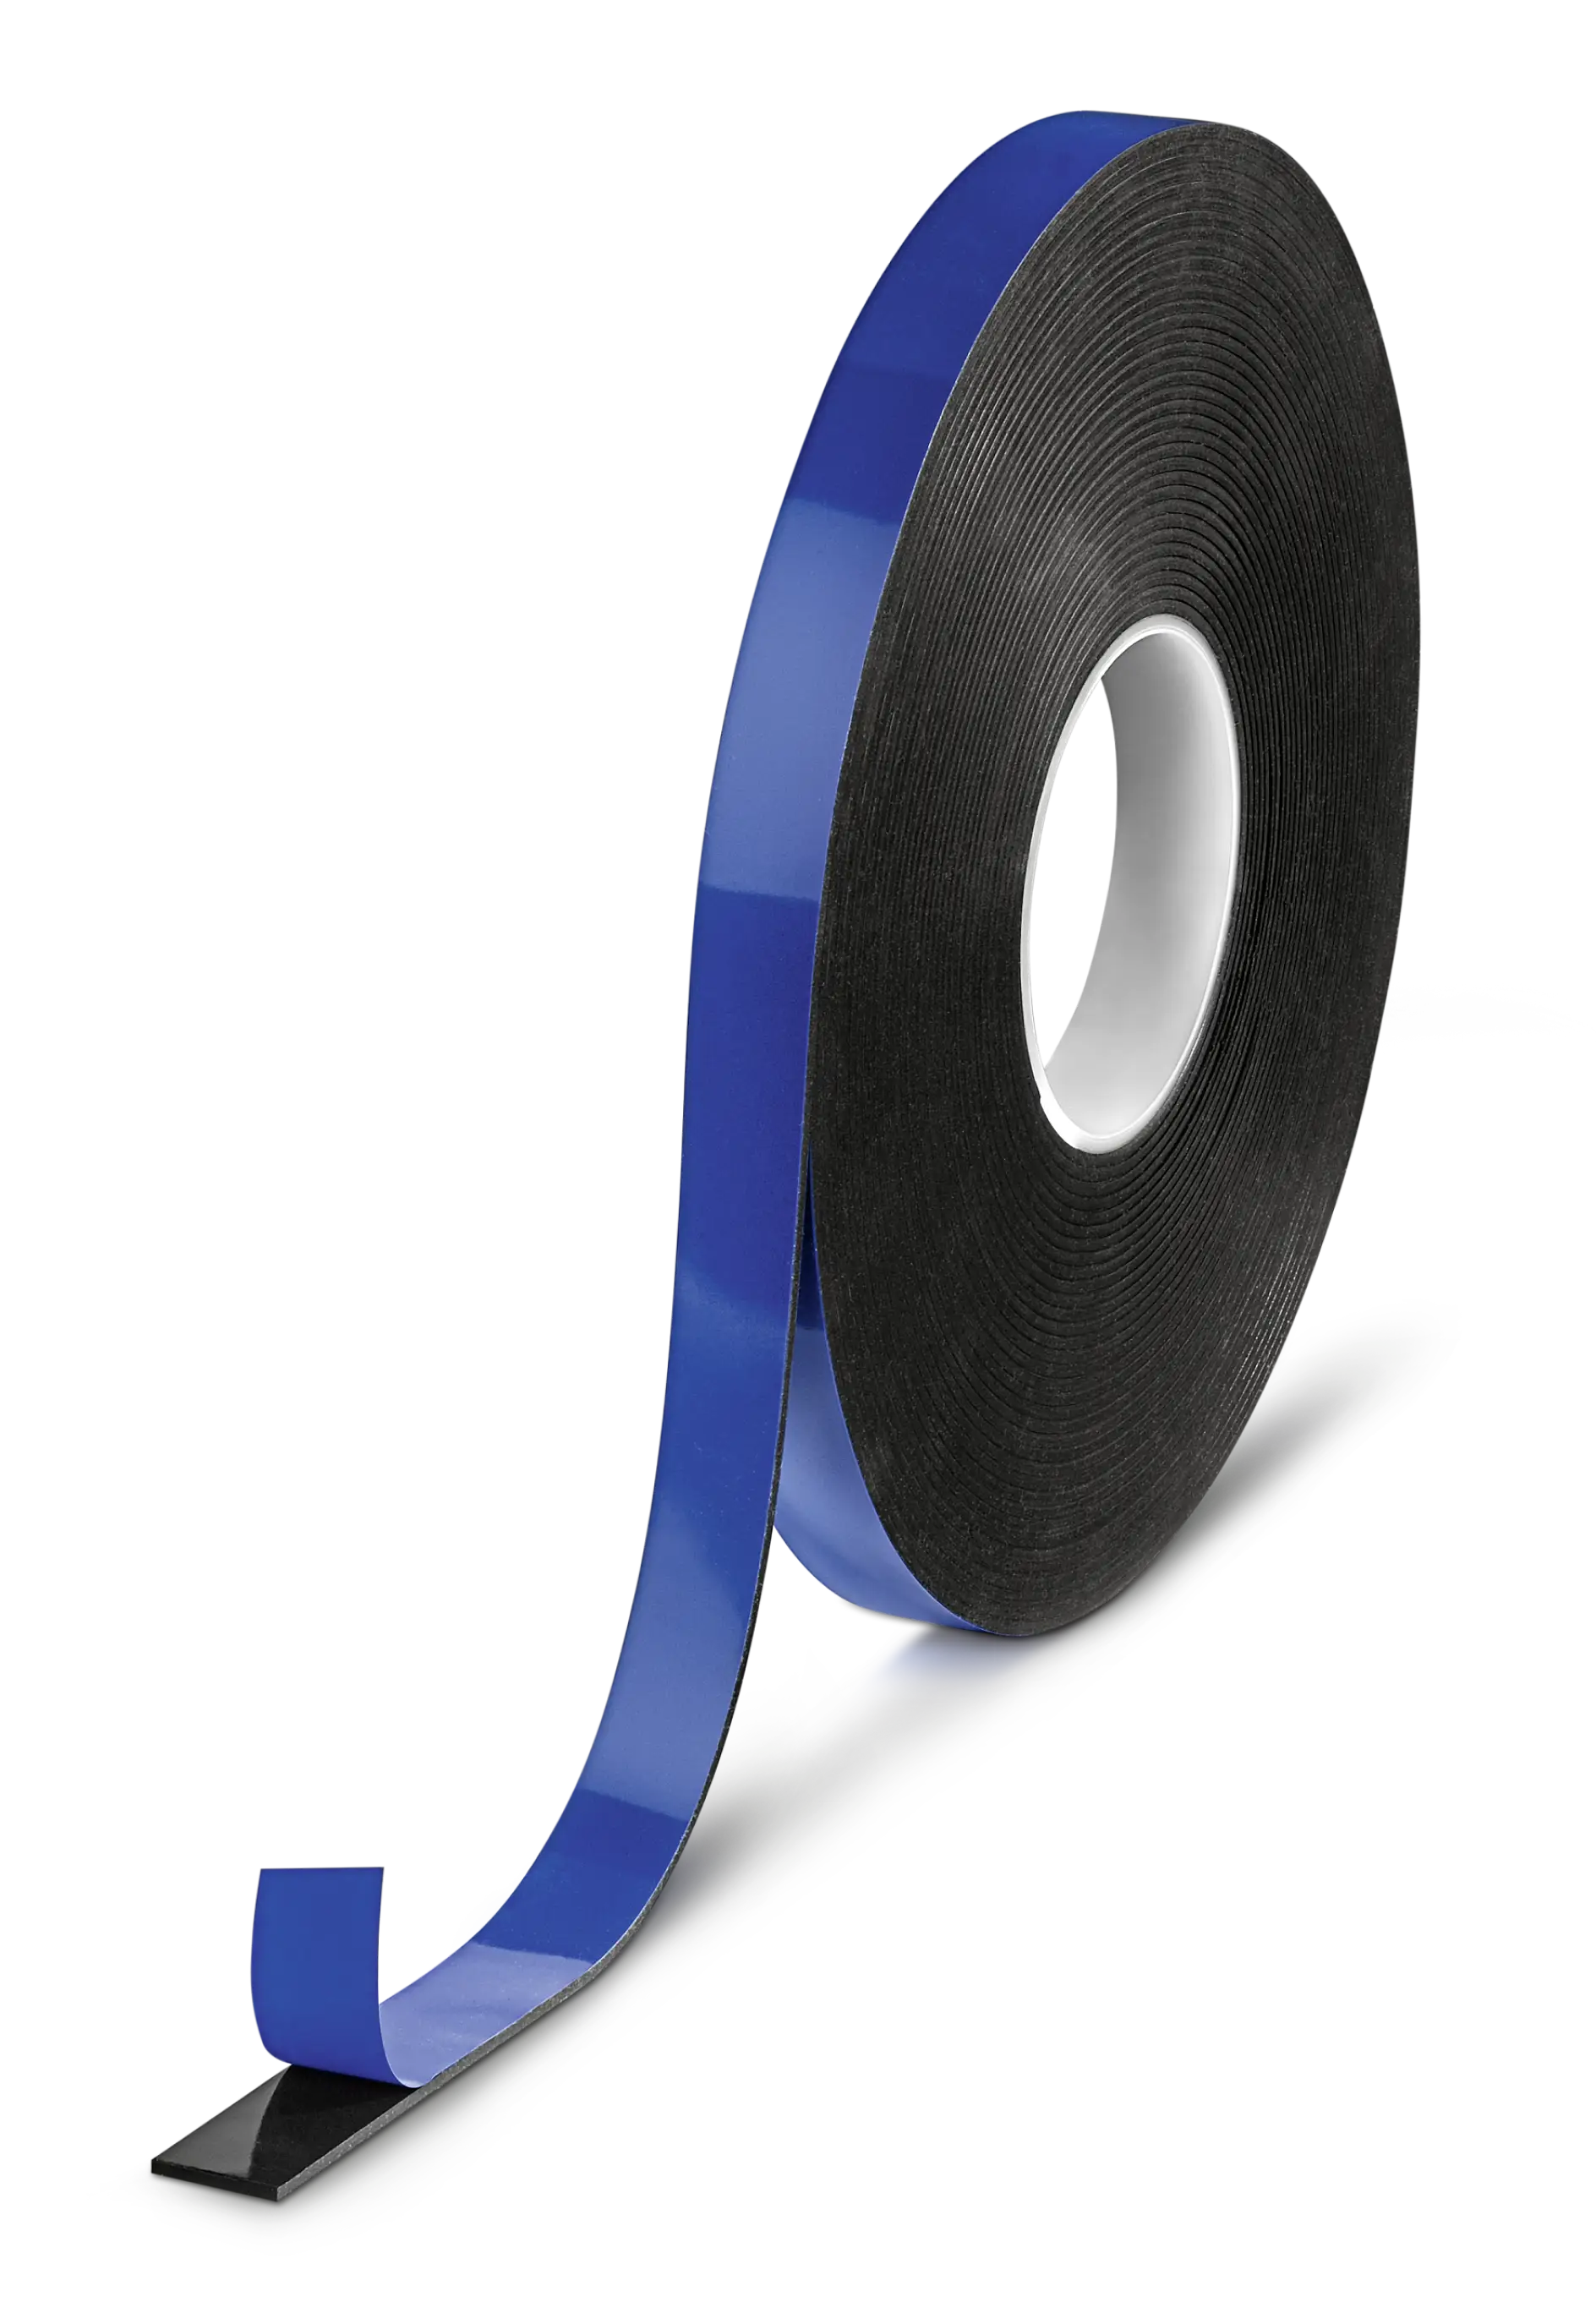 High Adhesion - 1,200µm black double-sided acrylic foam tape